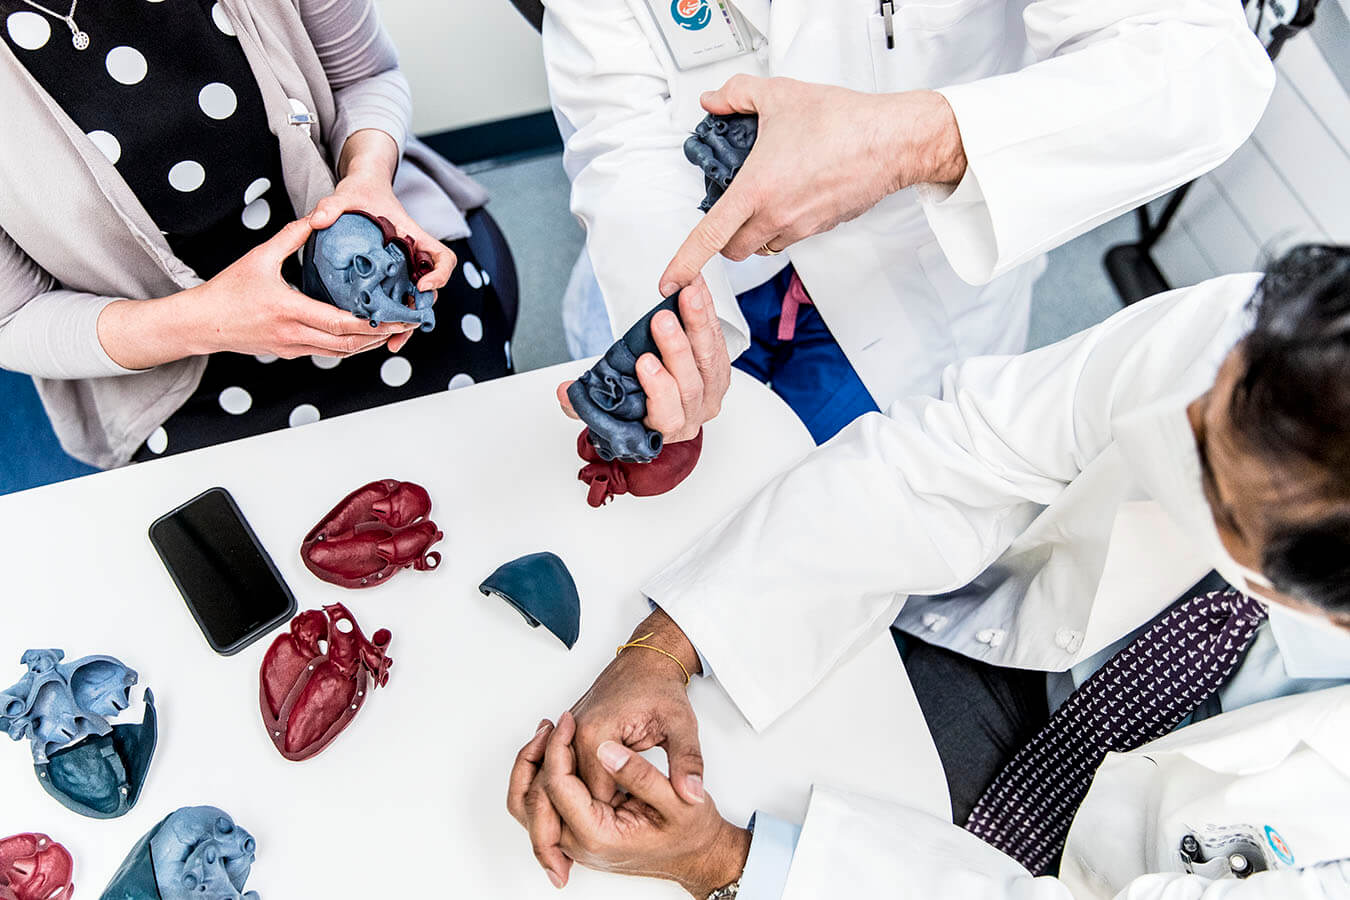 Doctors review model hearts at a white table.